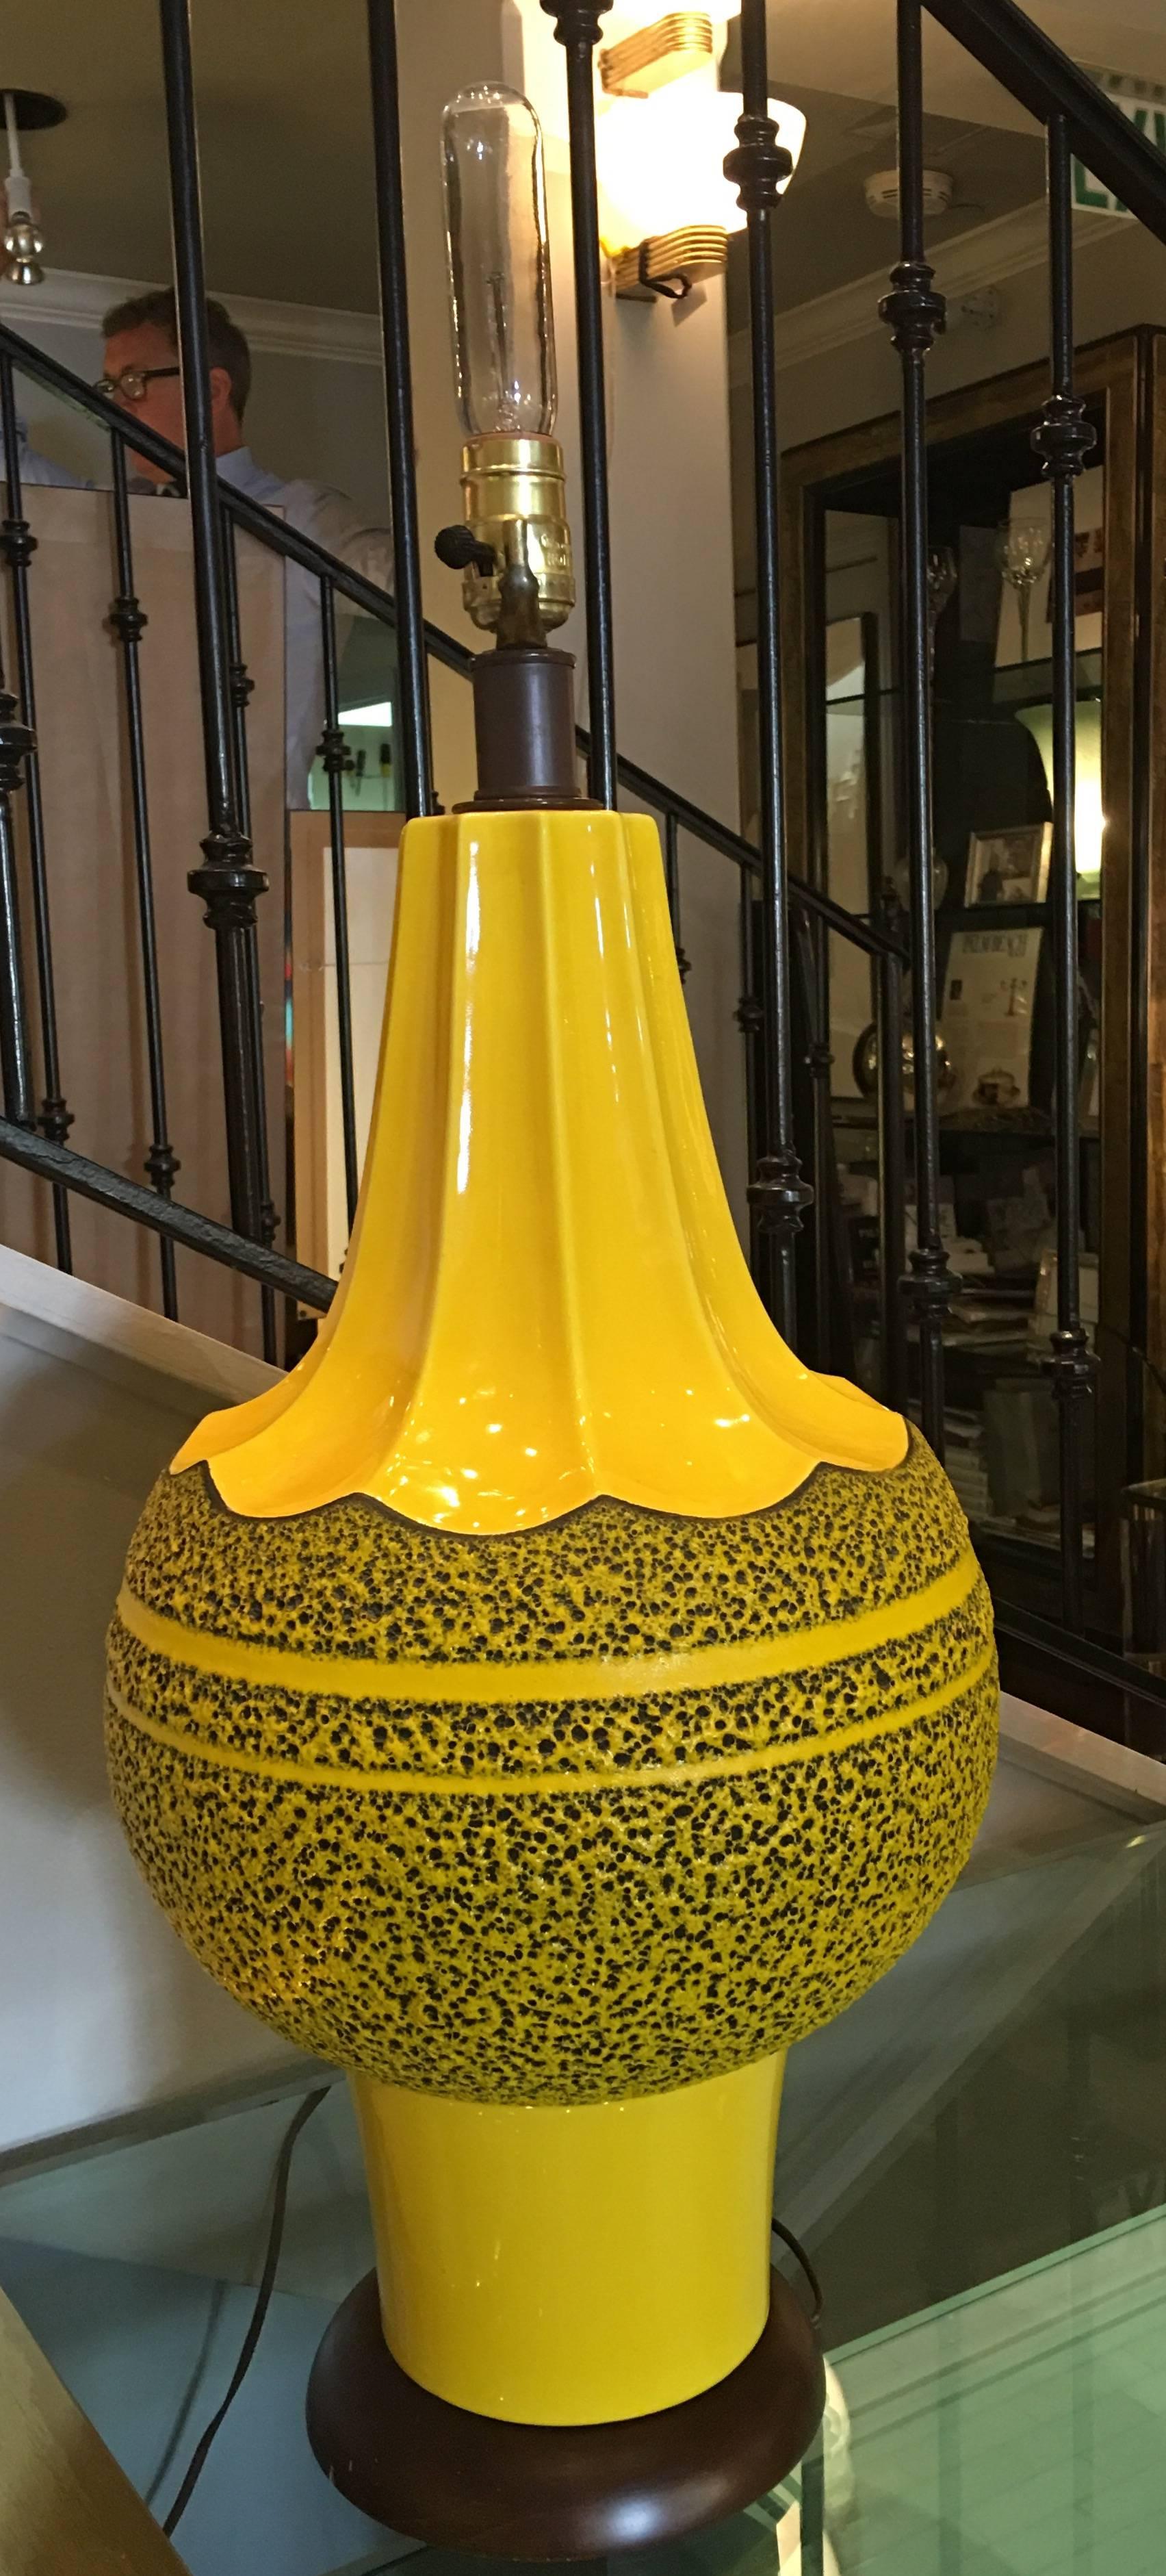 Large scale yellow ceramic lava lamp with wood base and red lamp shade, circa 1960.